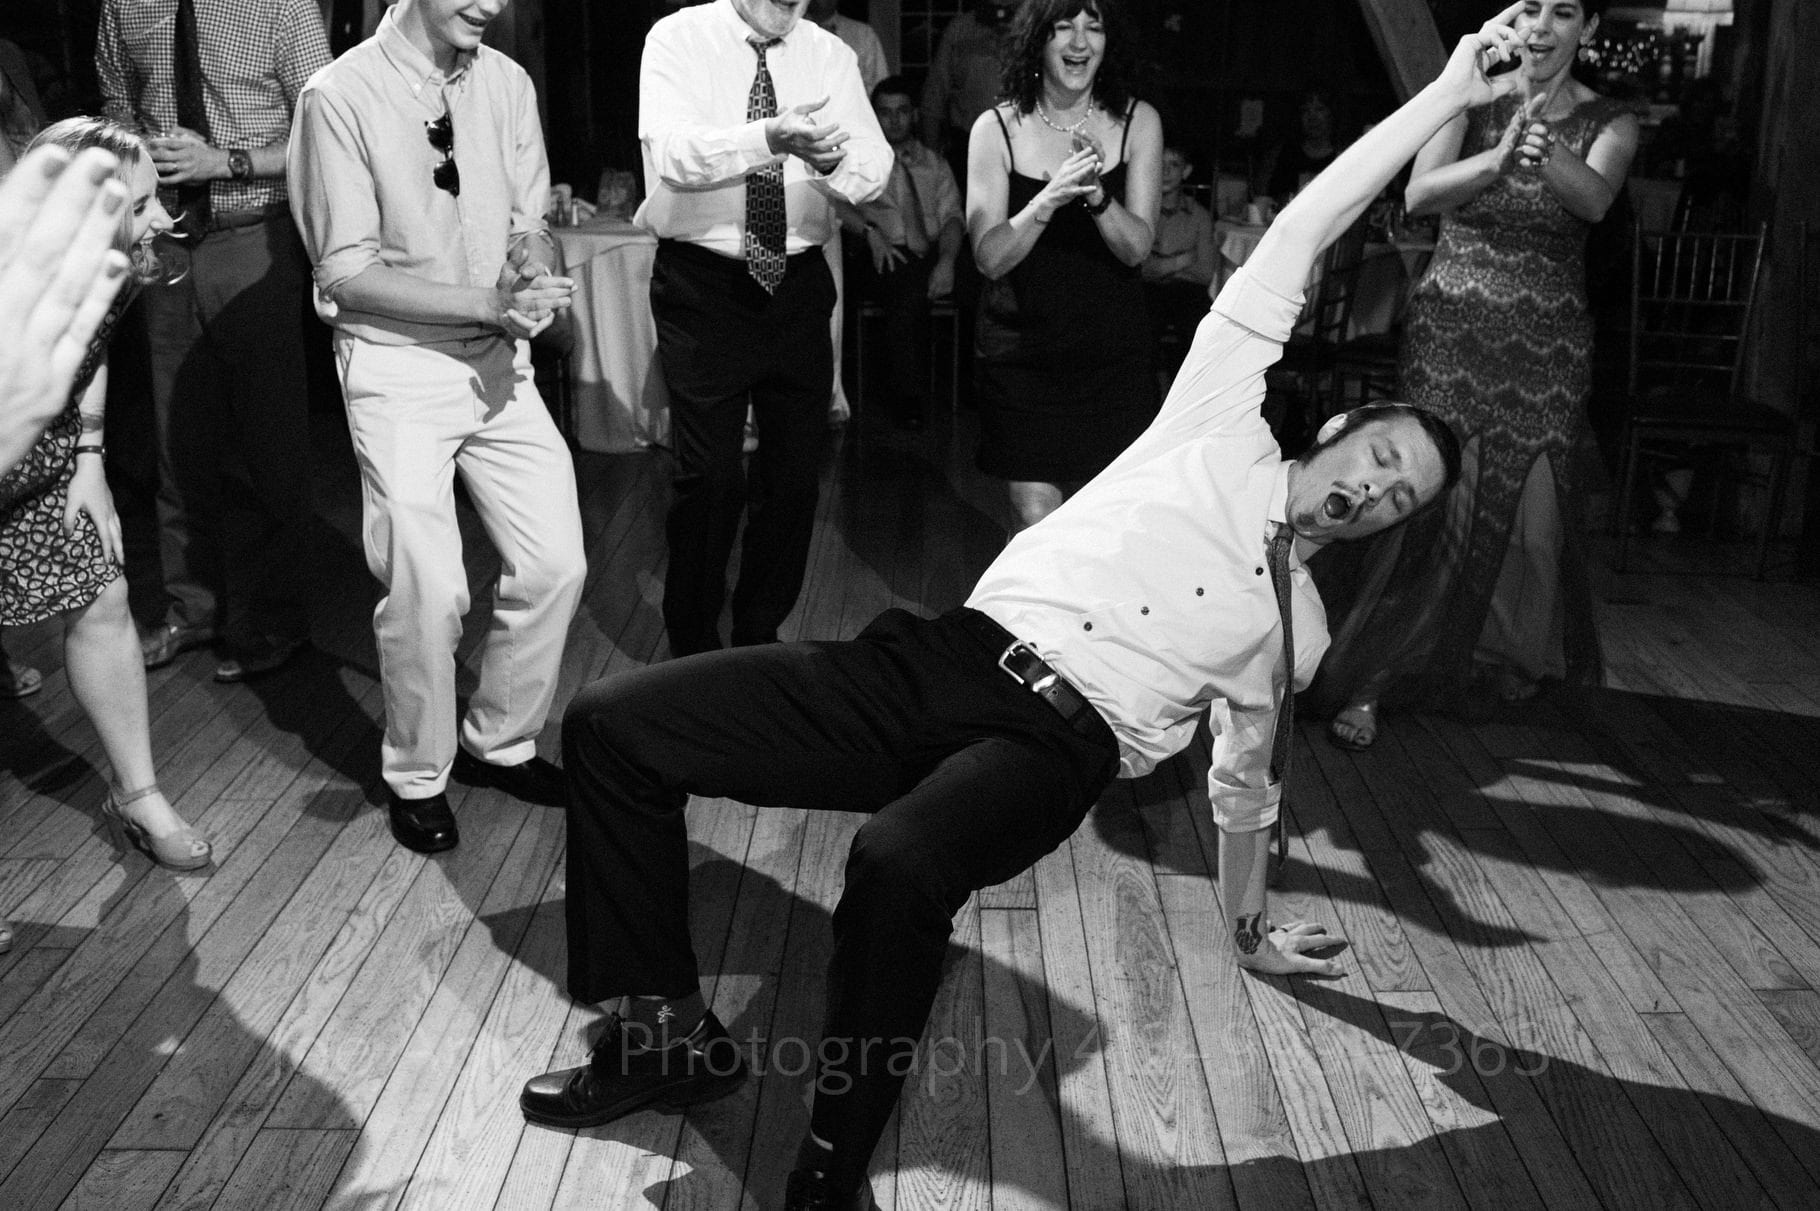 man bends over and touches the dance floor with one arm while the other arm is raised in the air. A group of guests stand around him during their Chanteclaire Farm Wedding.